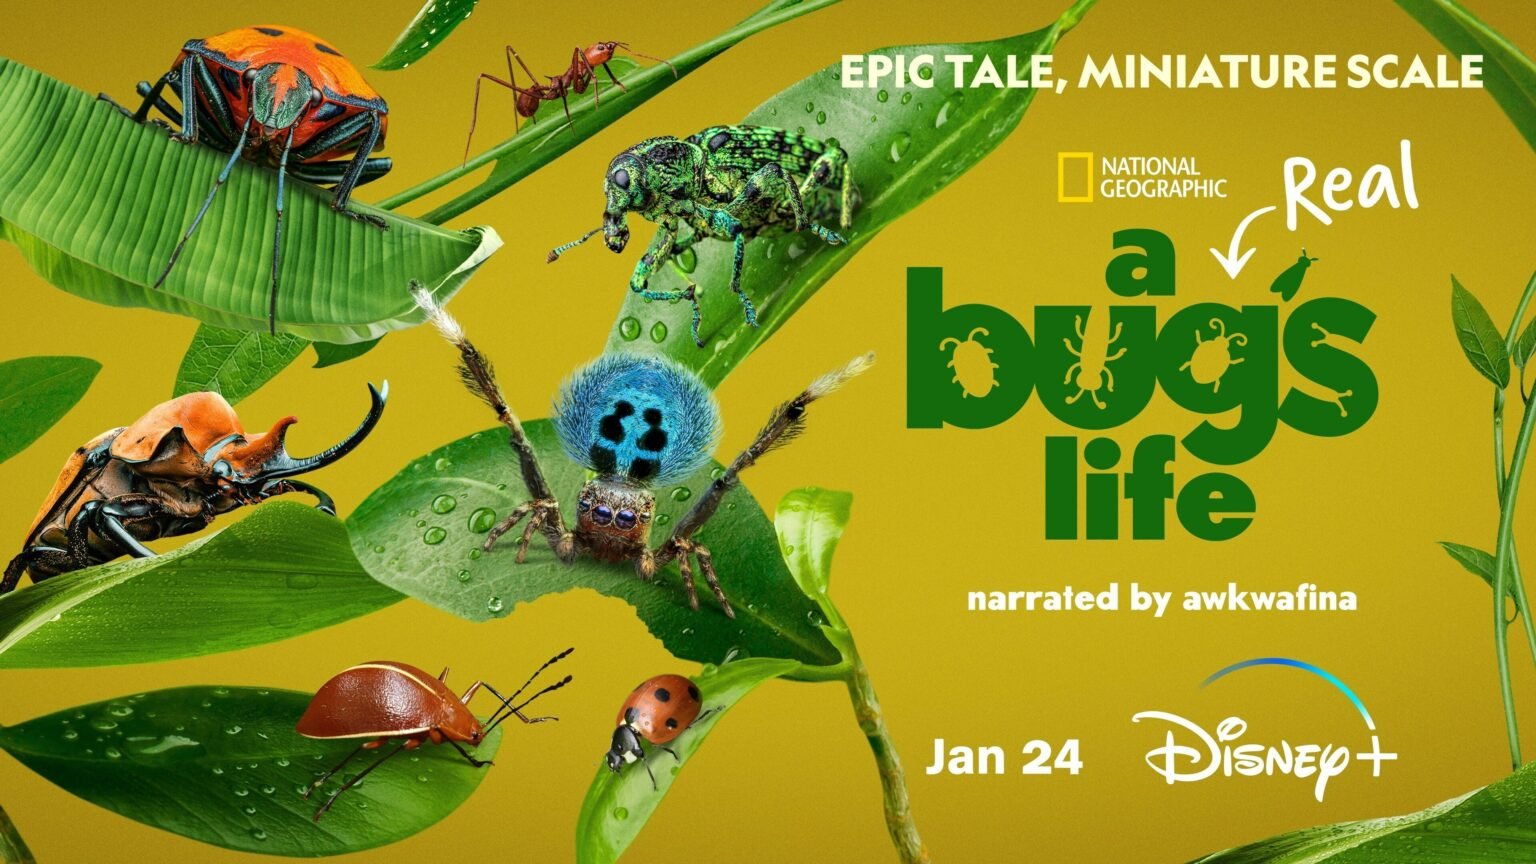 A Real Bug's Life / © Disney+ / National Geographic